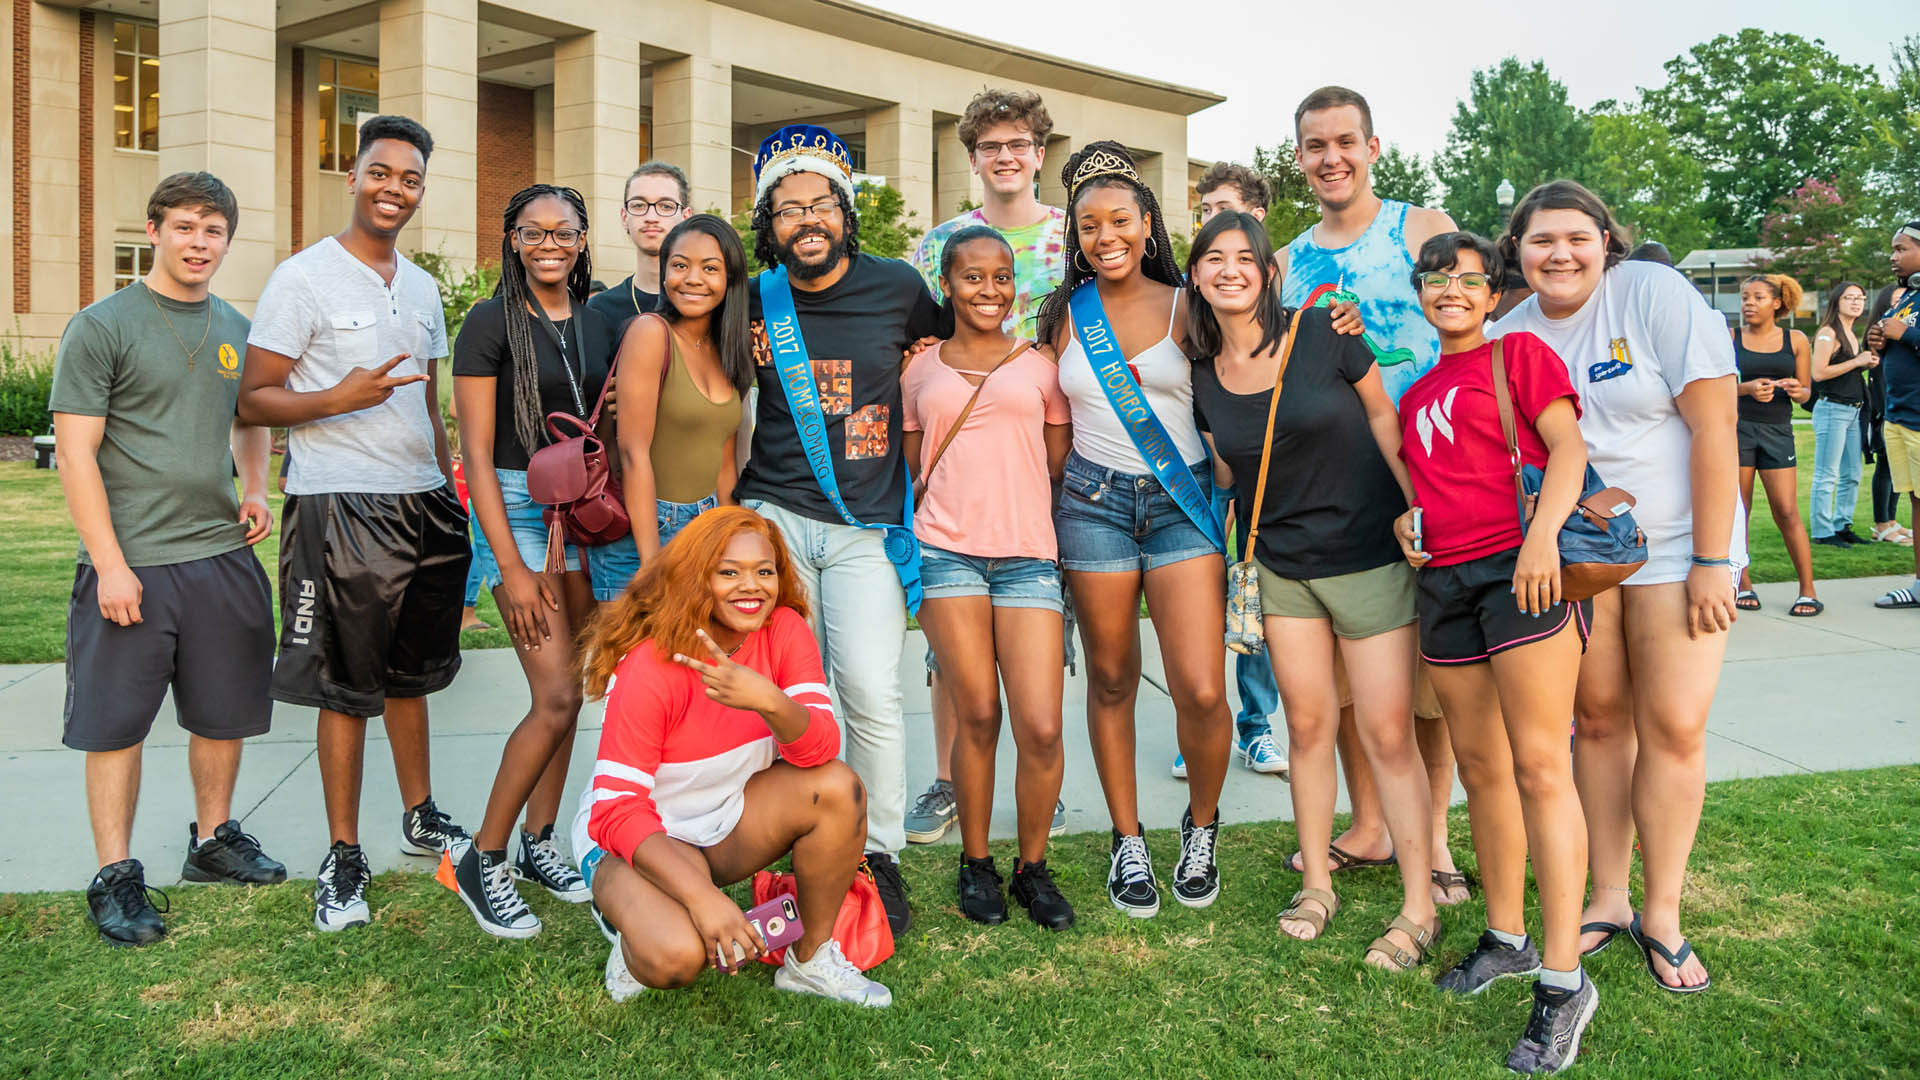 A diverse group of UNCG students pose for a picture on Kaplan Commons in front of the Elliott University Center.